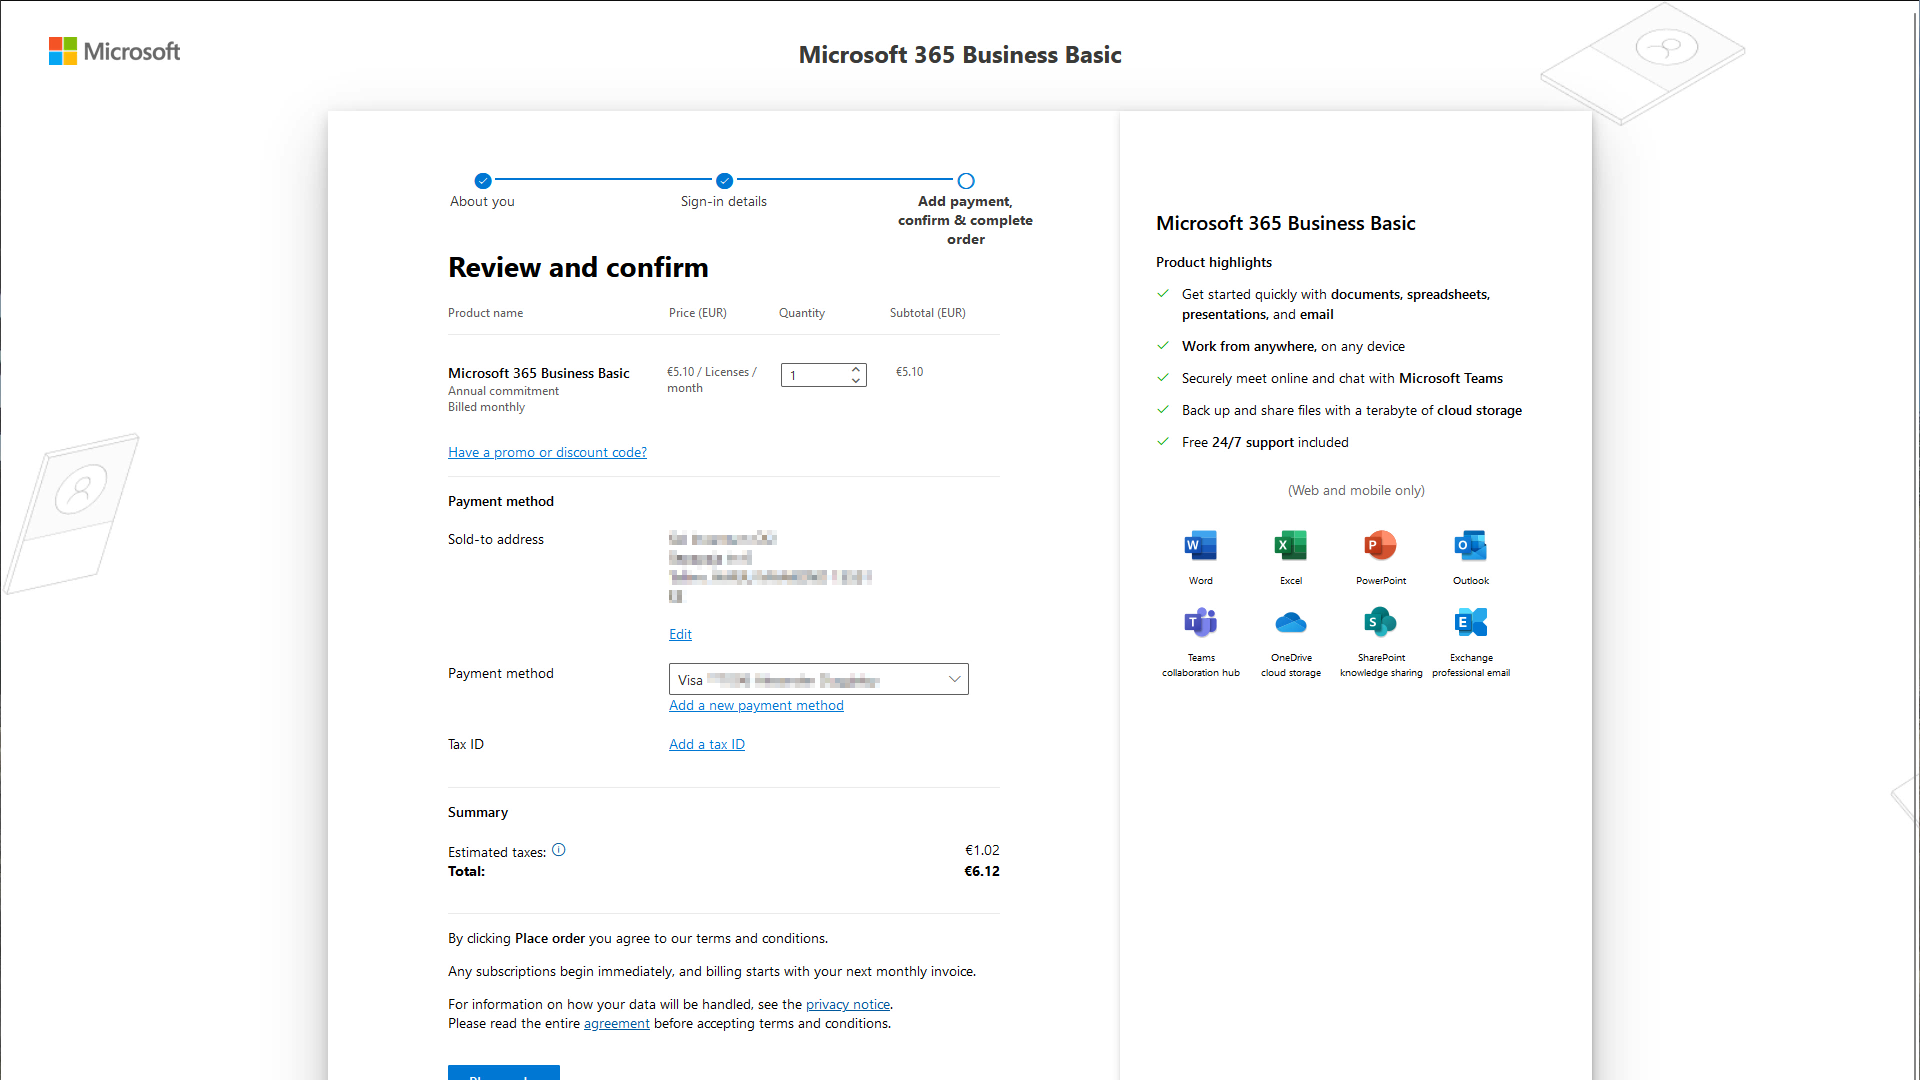 Confirming your Microsoft 365 purchase